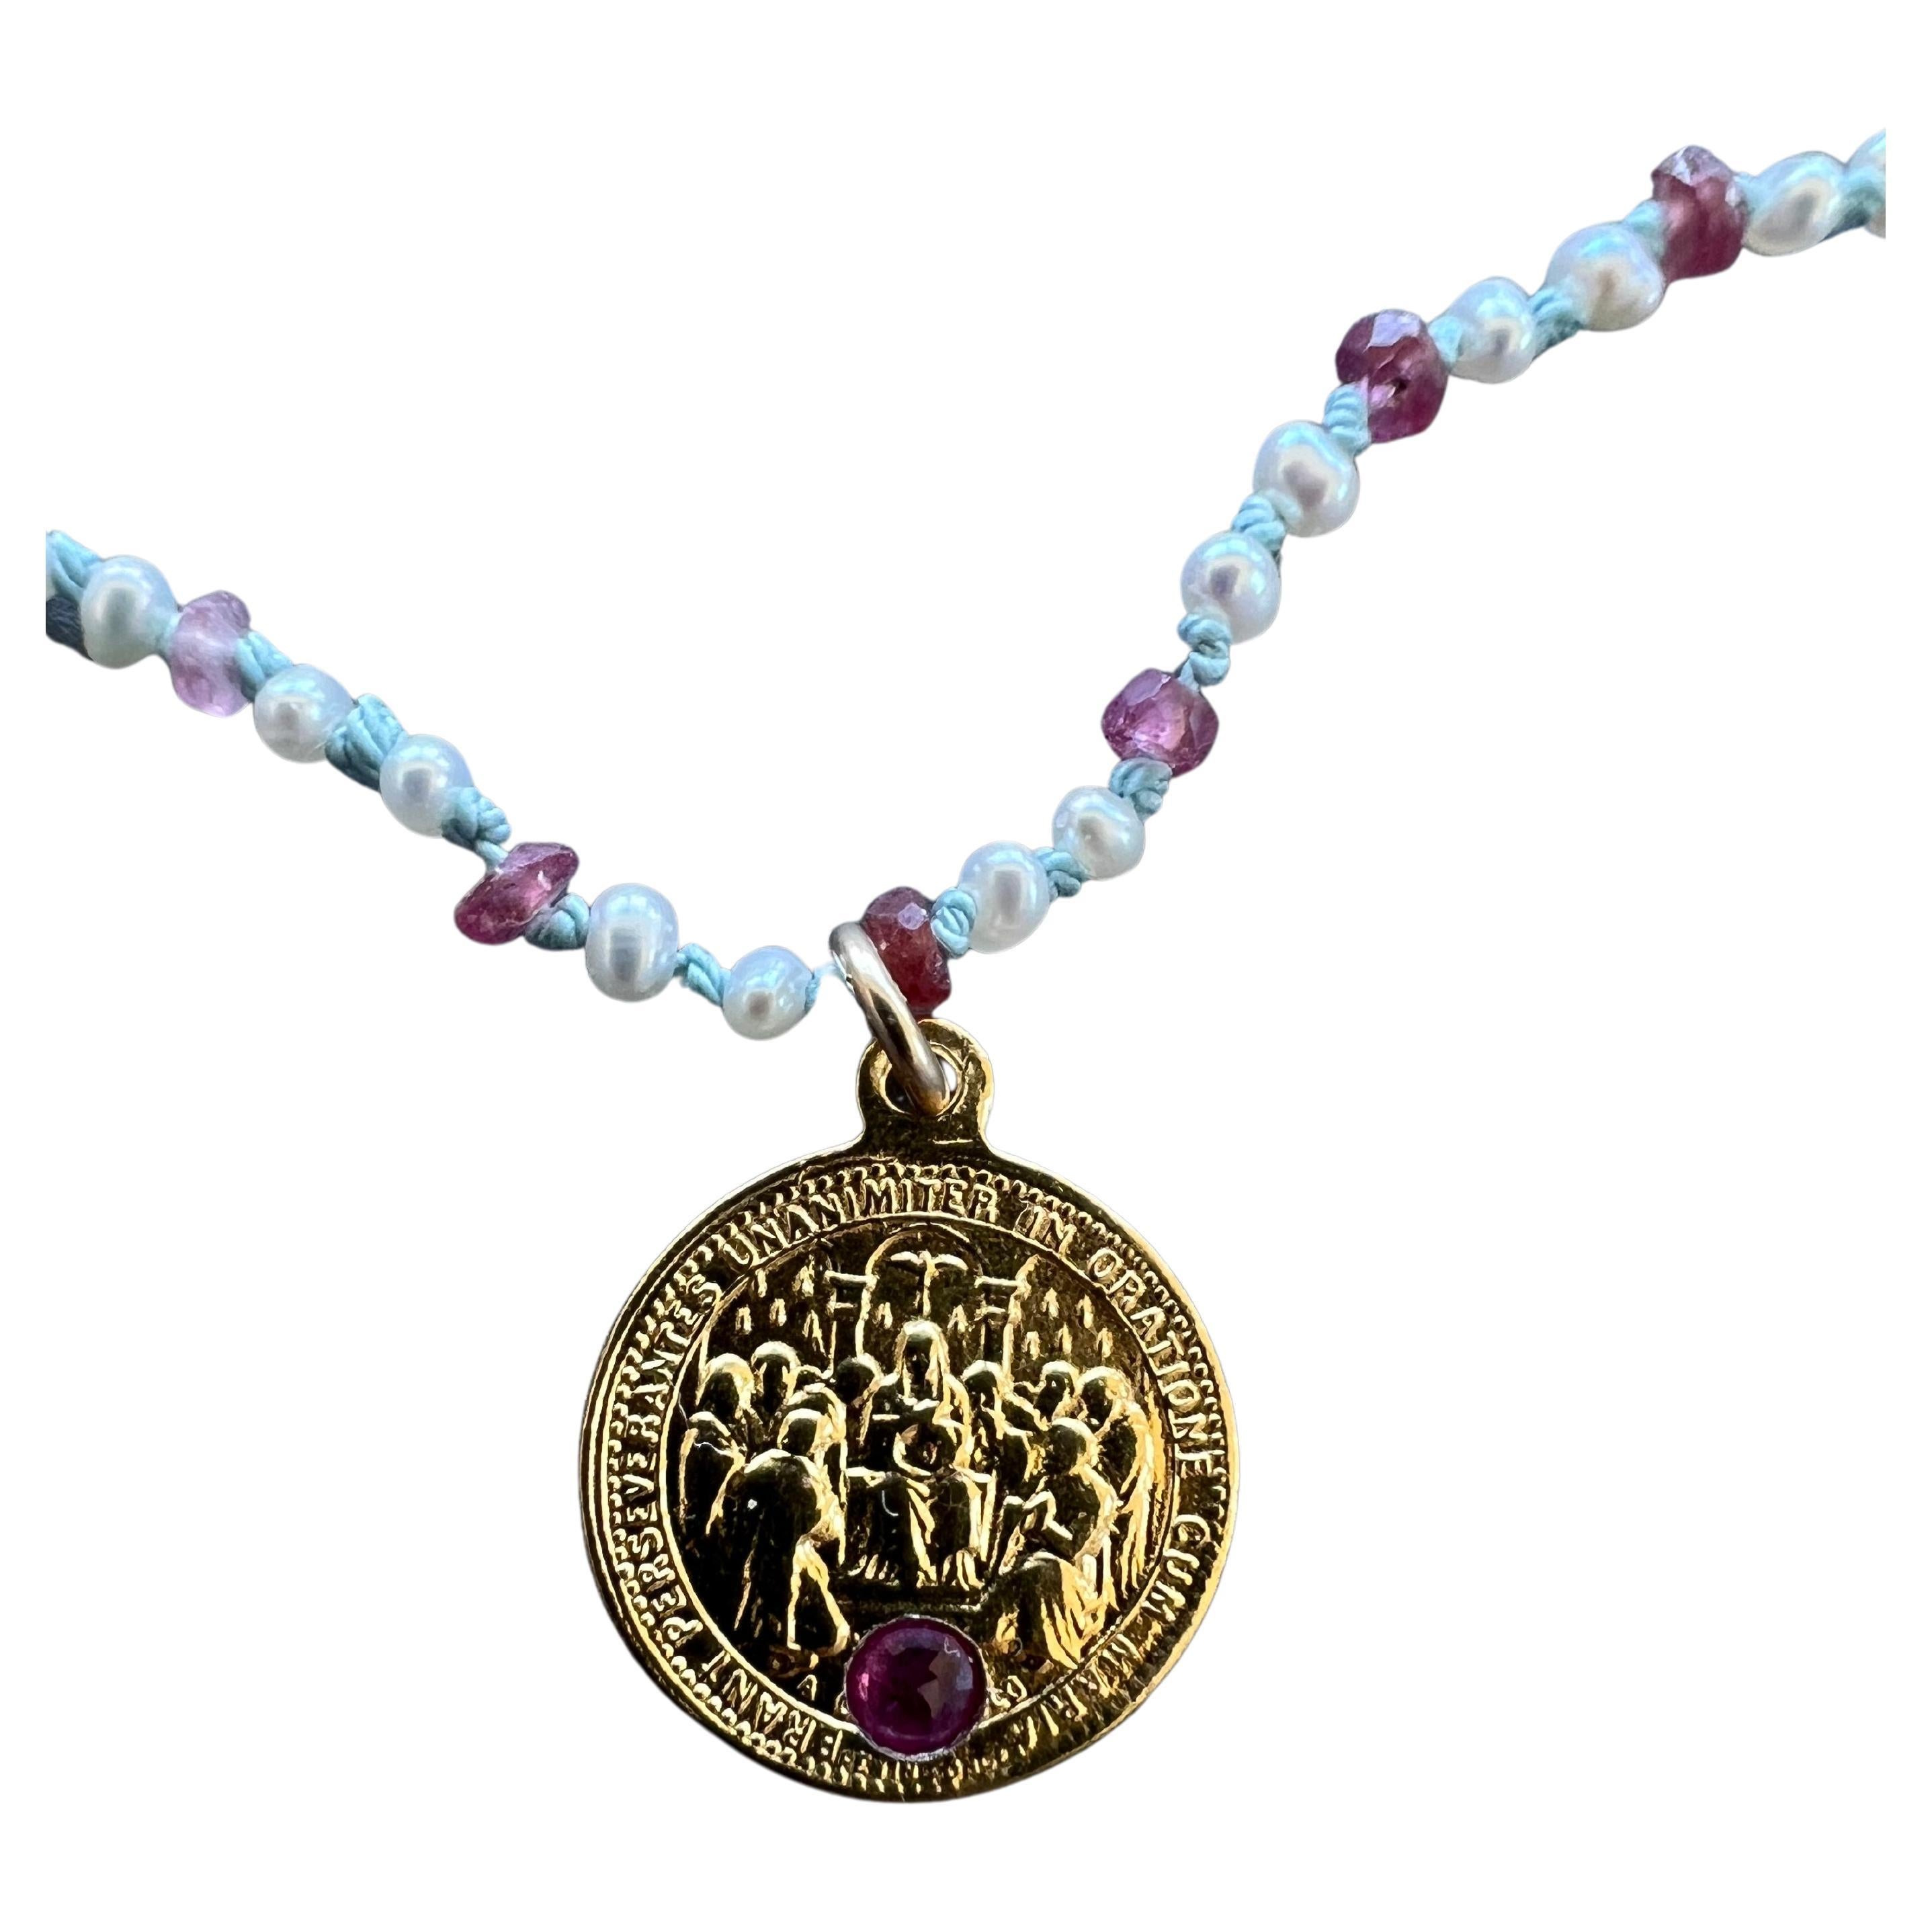 Pink Tourmaline Set in a Gold Plated Sacred Heart Medal with a Necklace made out of White Pearl Opal Ruby Beaded with Light Blue Silk Knots in between
Choker Necklace 16